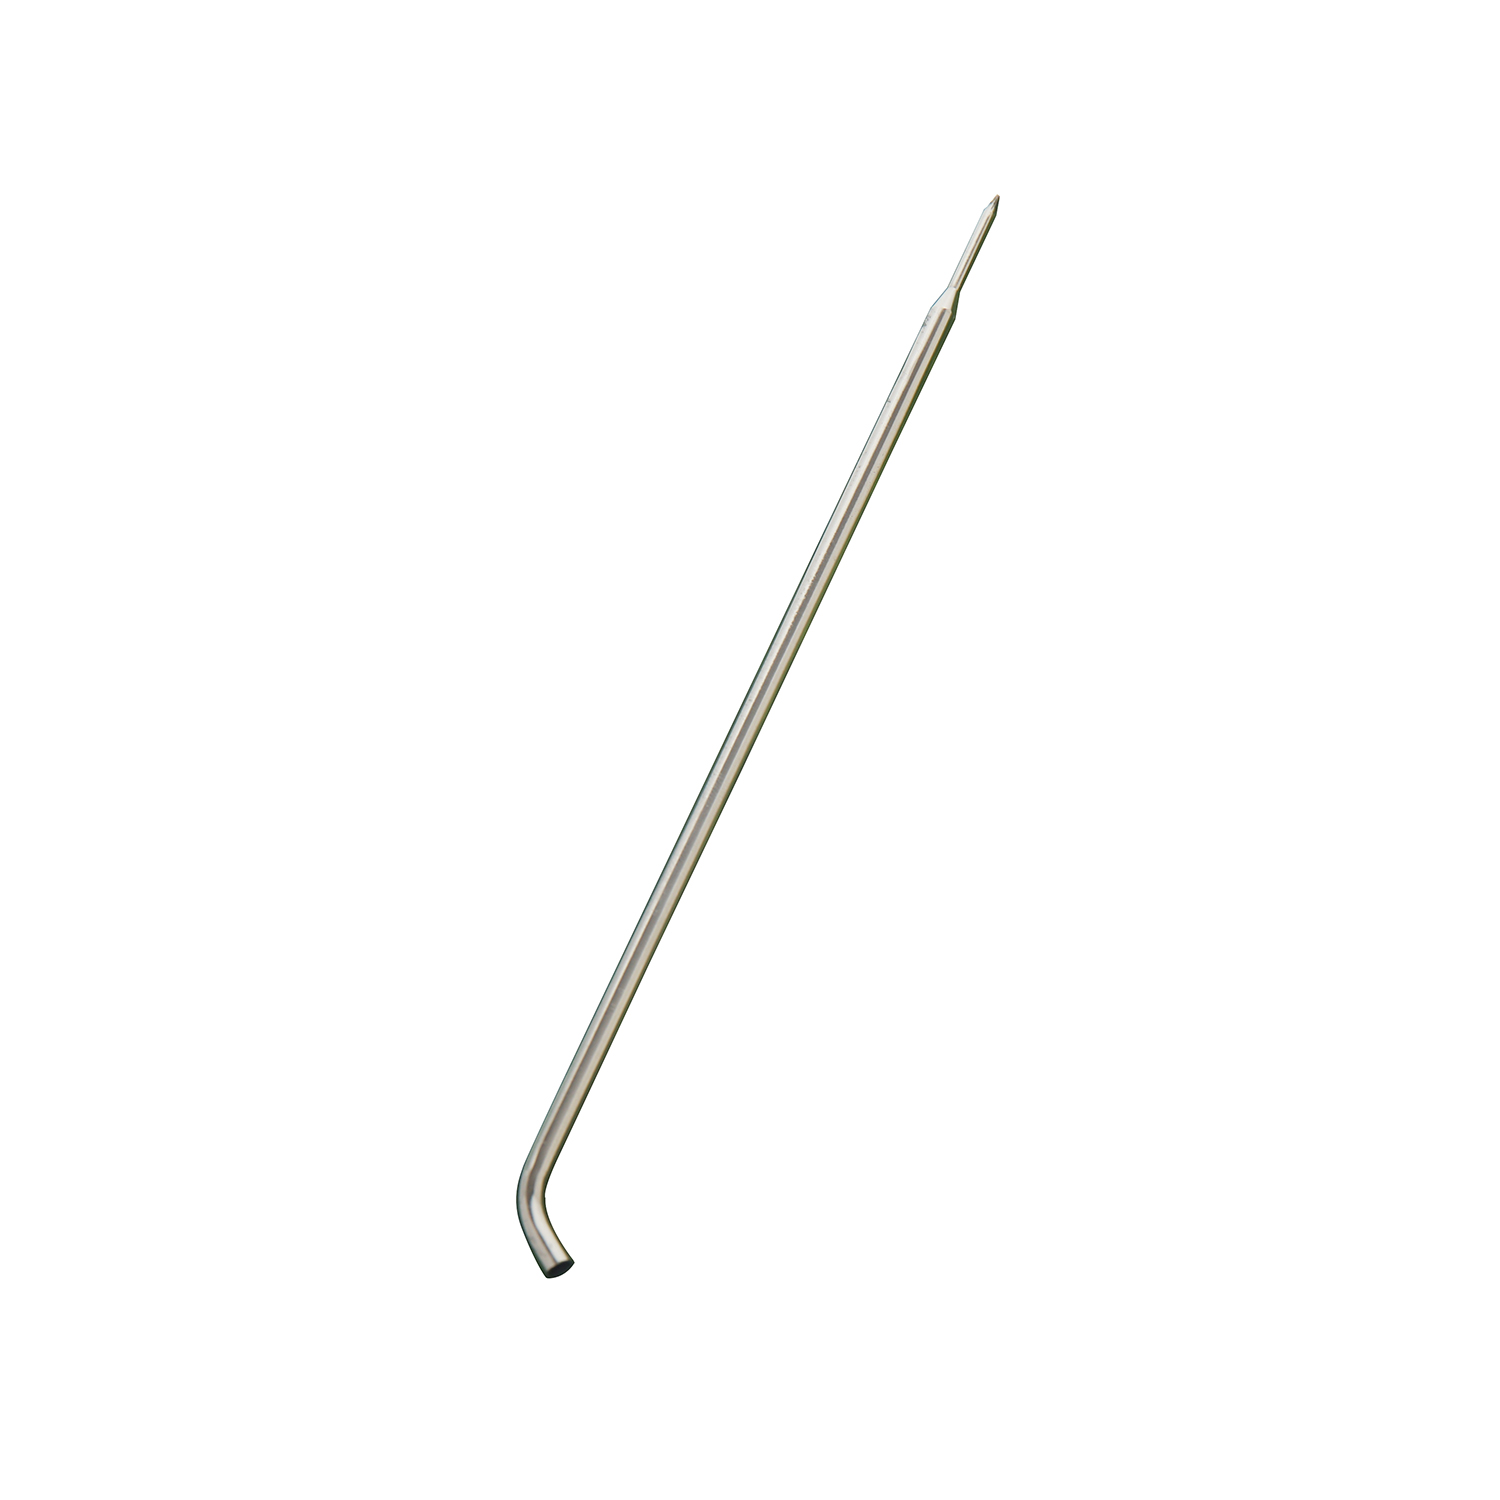 Surgical Special Conical Long Needle Injection Stainless Steel Medical Needle Featured Image